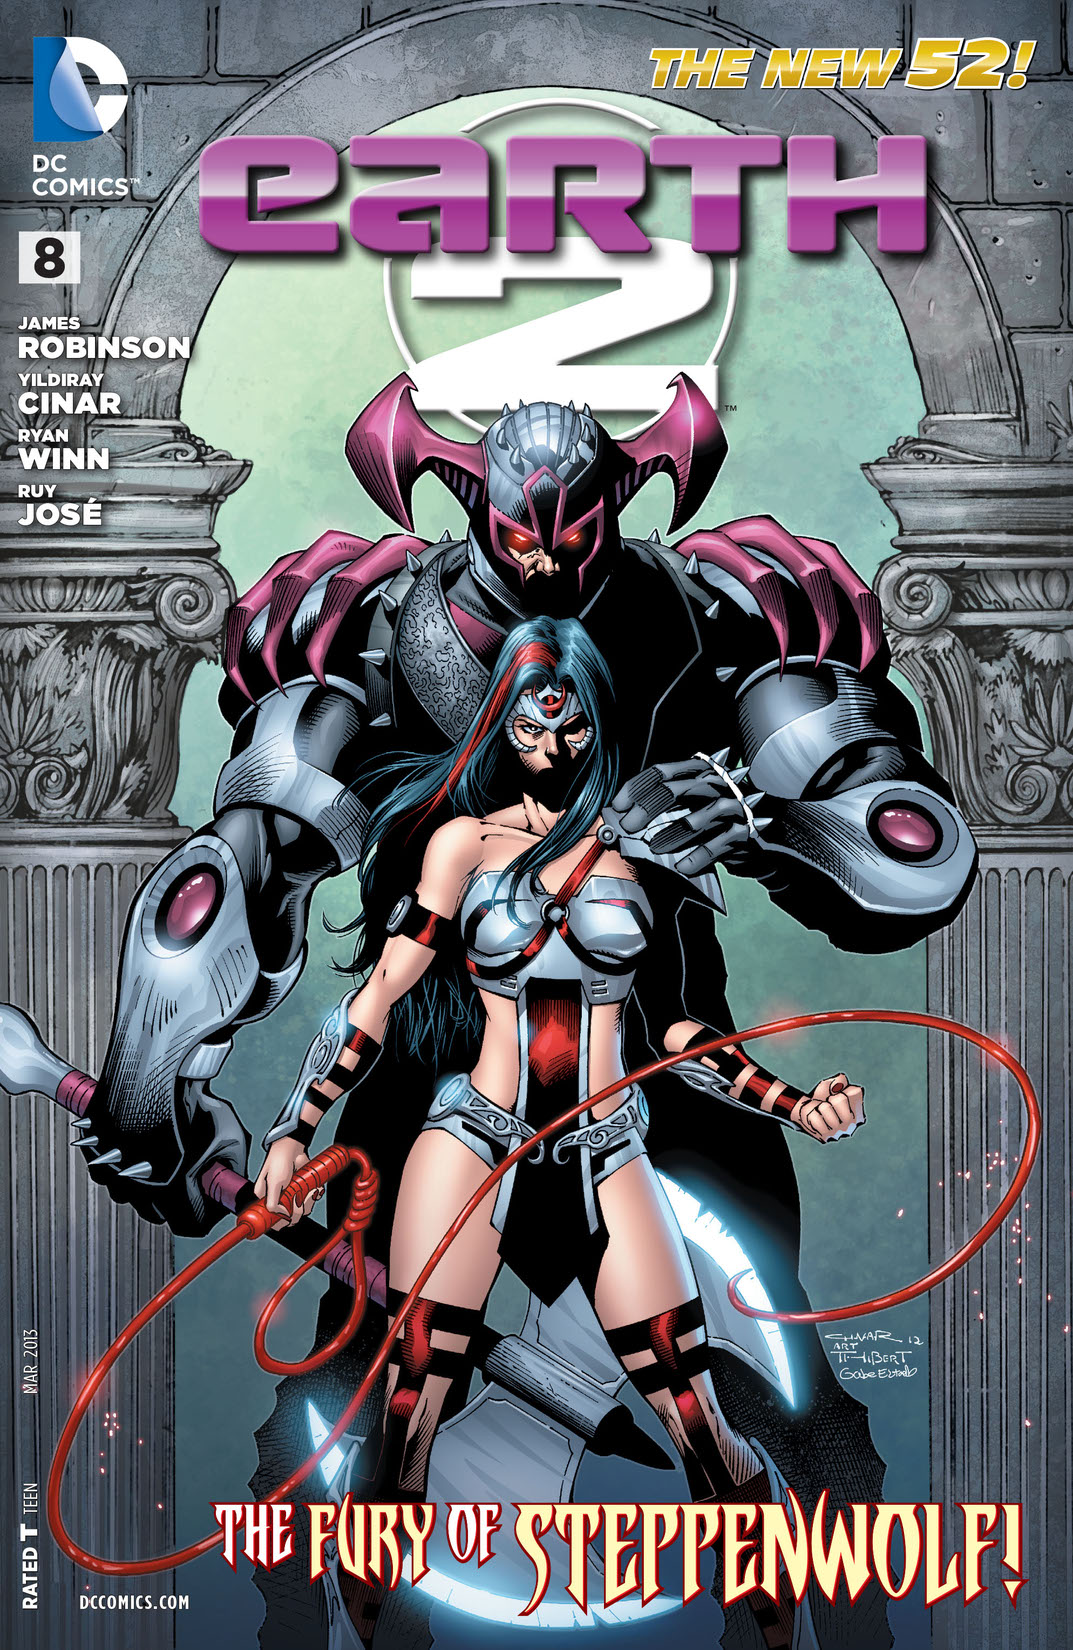 Earth 2 #8 preview images